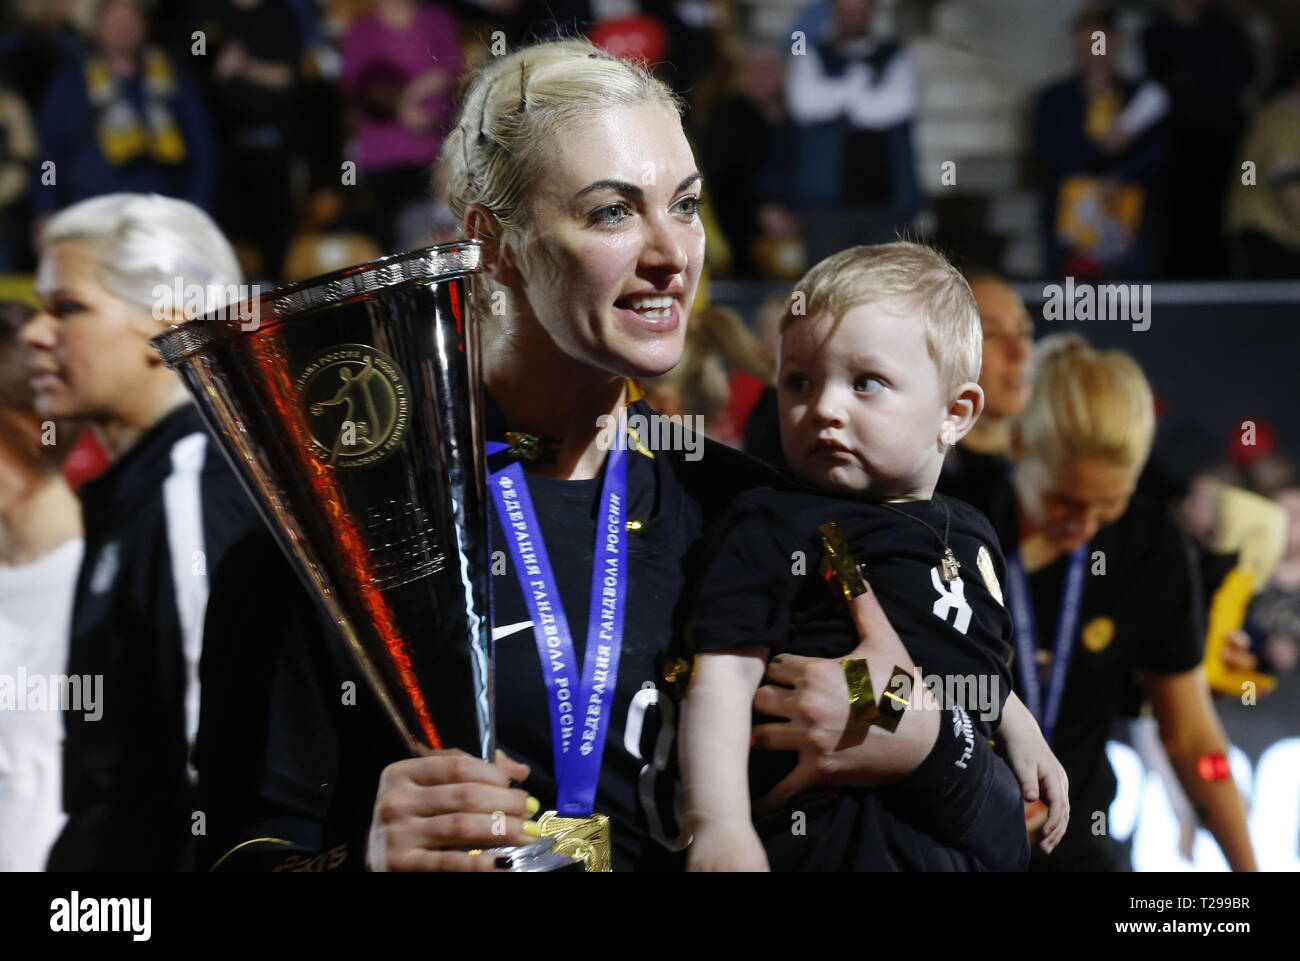 Rostov On Don, Russia. 31st Mar, 2019. ROSTOV-ON-DON, RUSSIA - MARCH 31,  2019: Rostov-Don's Polina Kuznetsova (front) celebrates her team winning  their Russian Women's Handball Cup Final Four final match against Lada